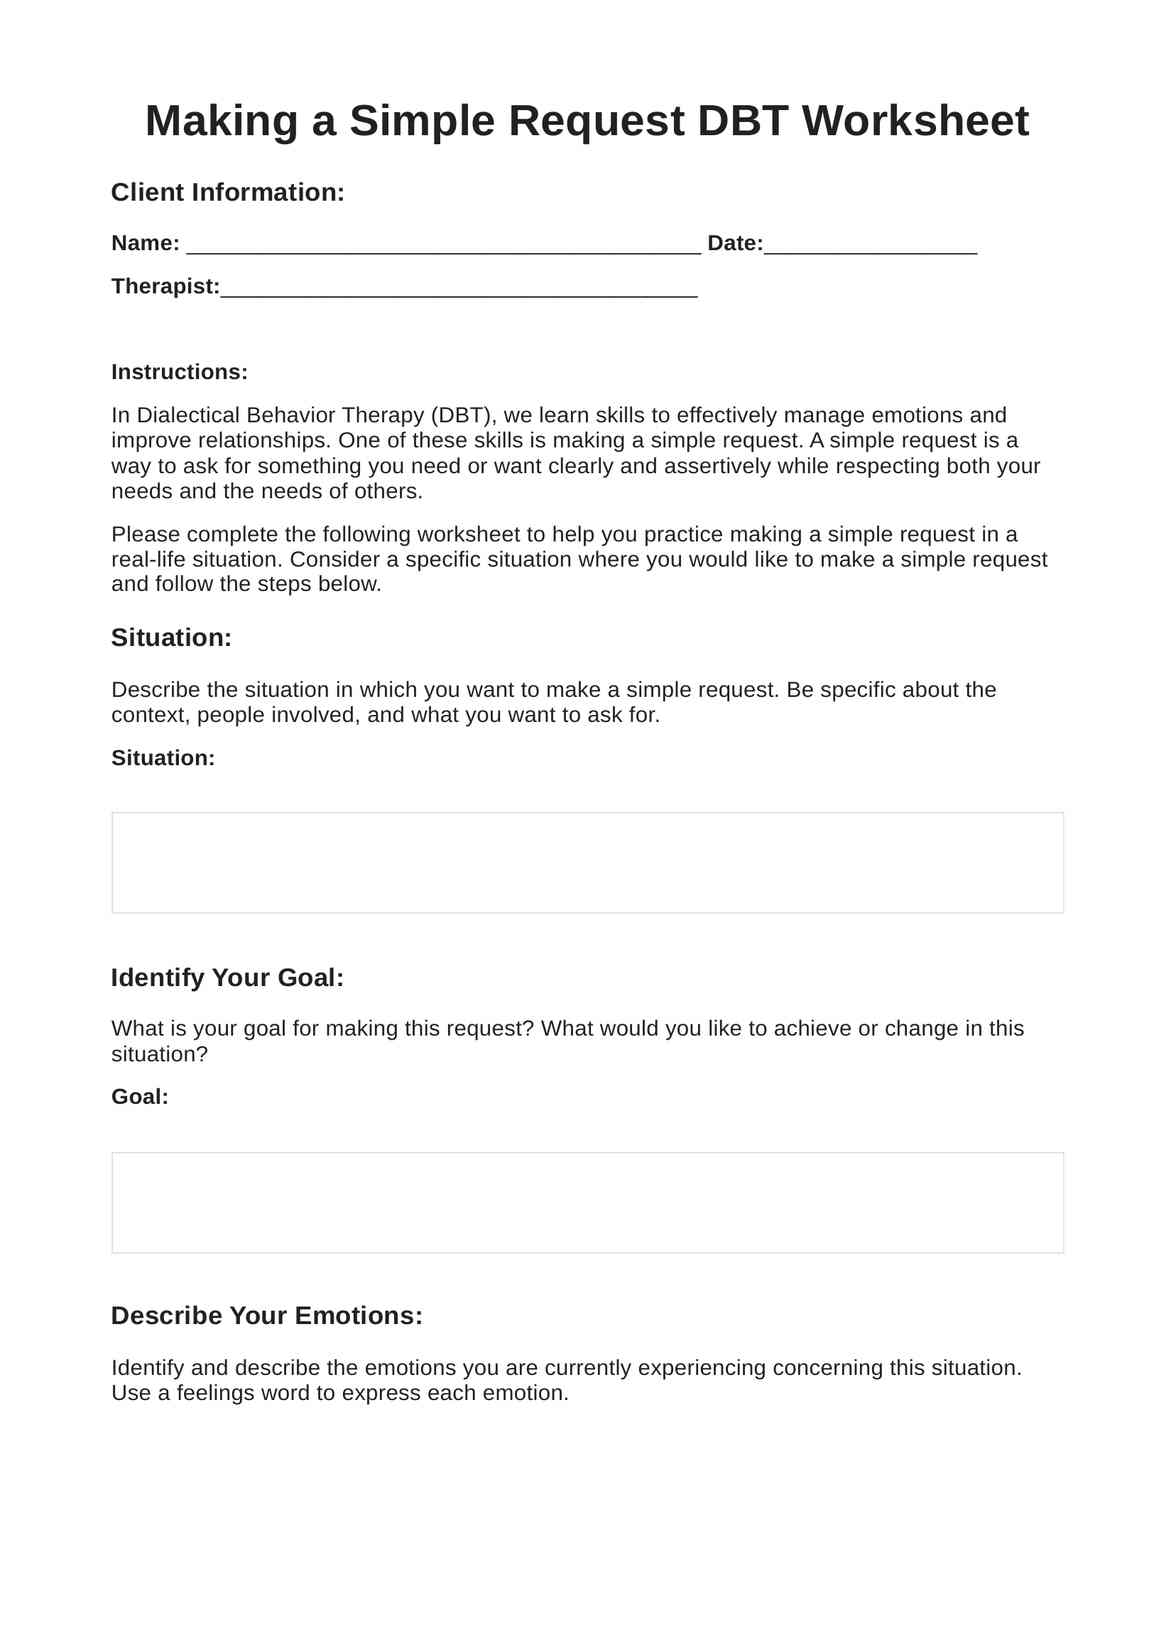 Making a Simple Request DBT Worksheet PDF Example